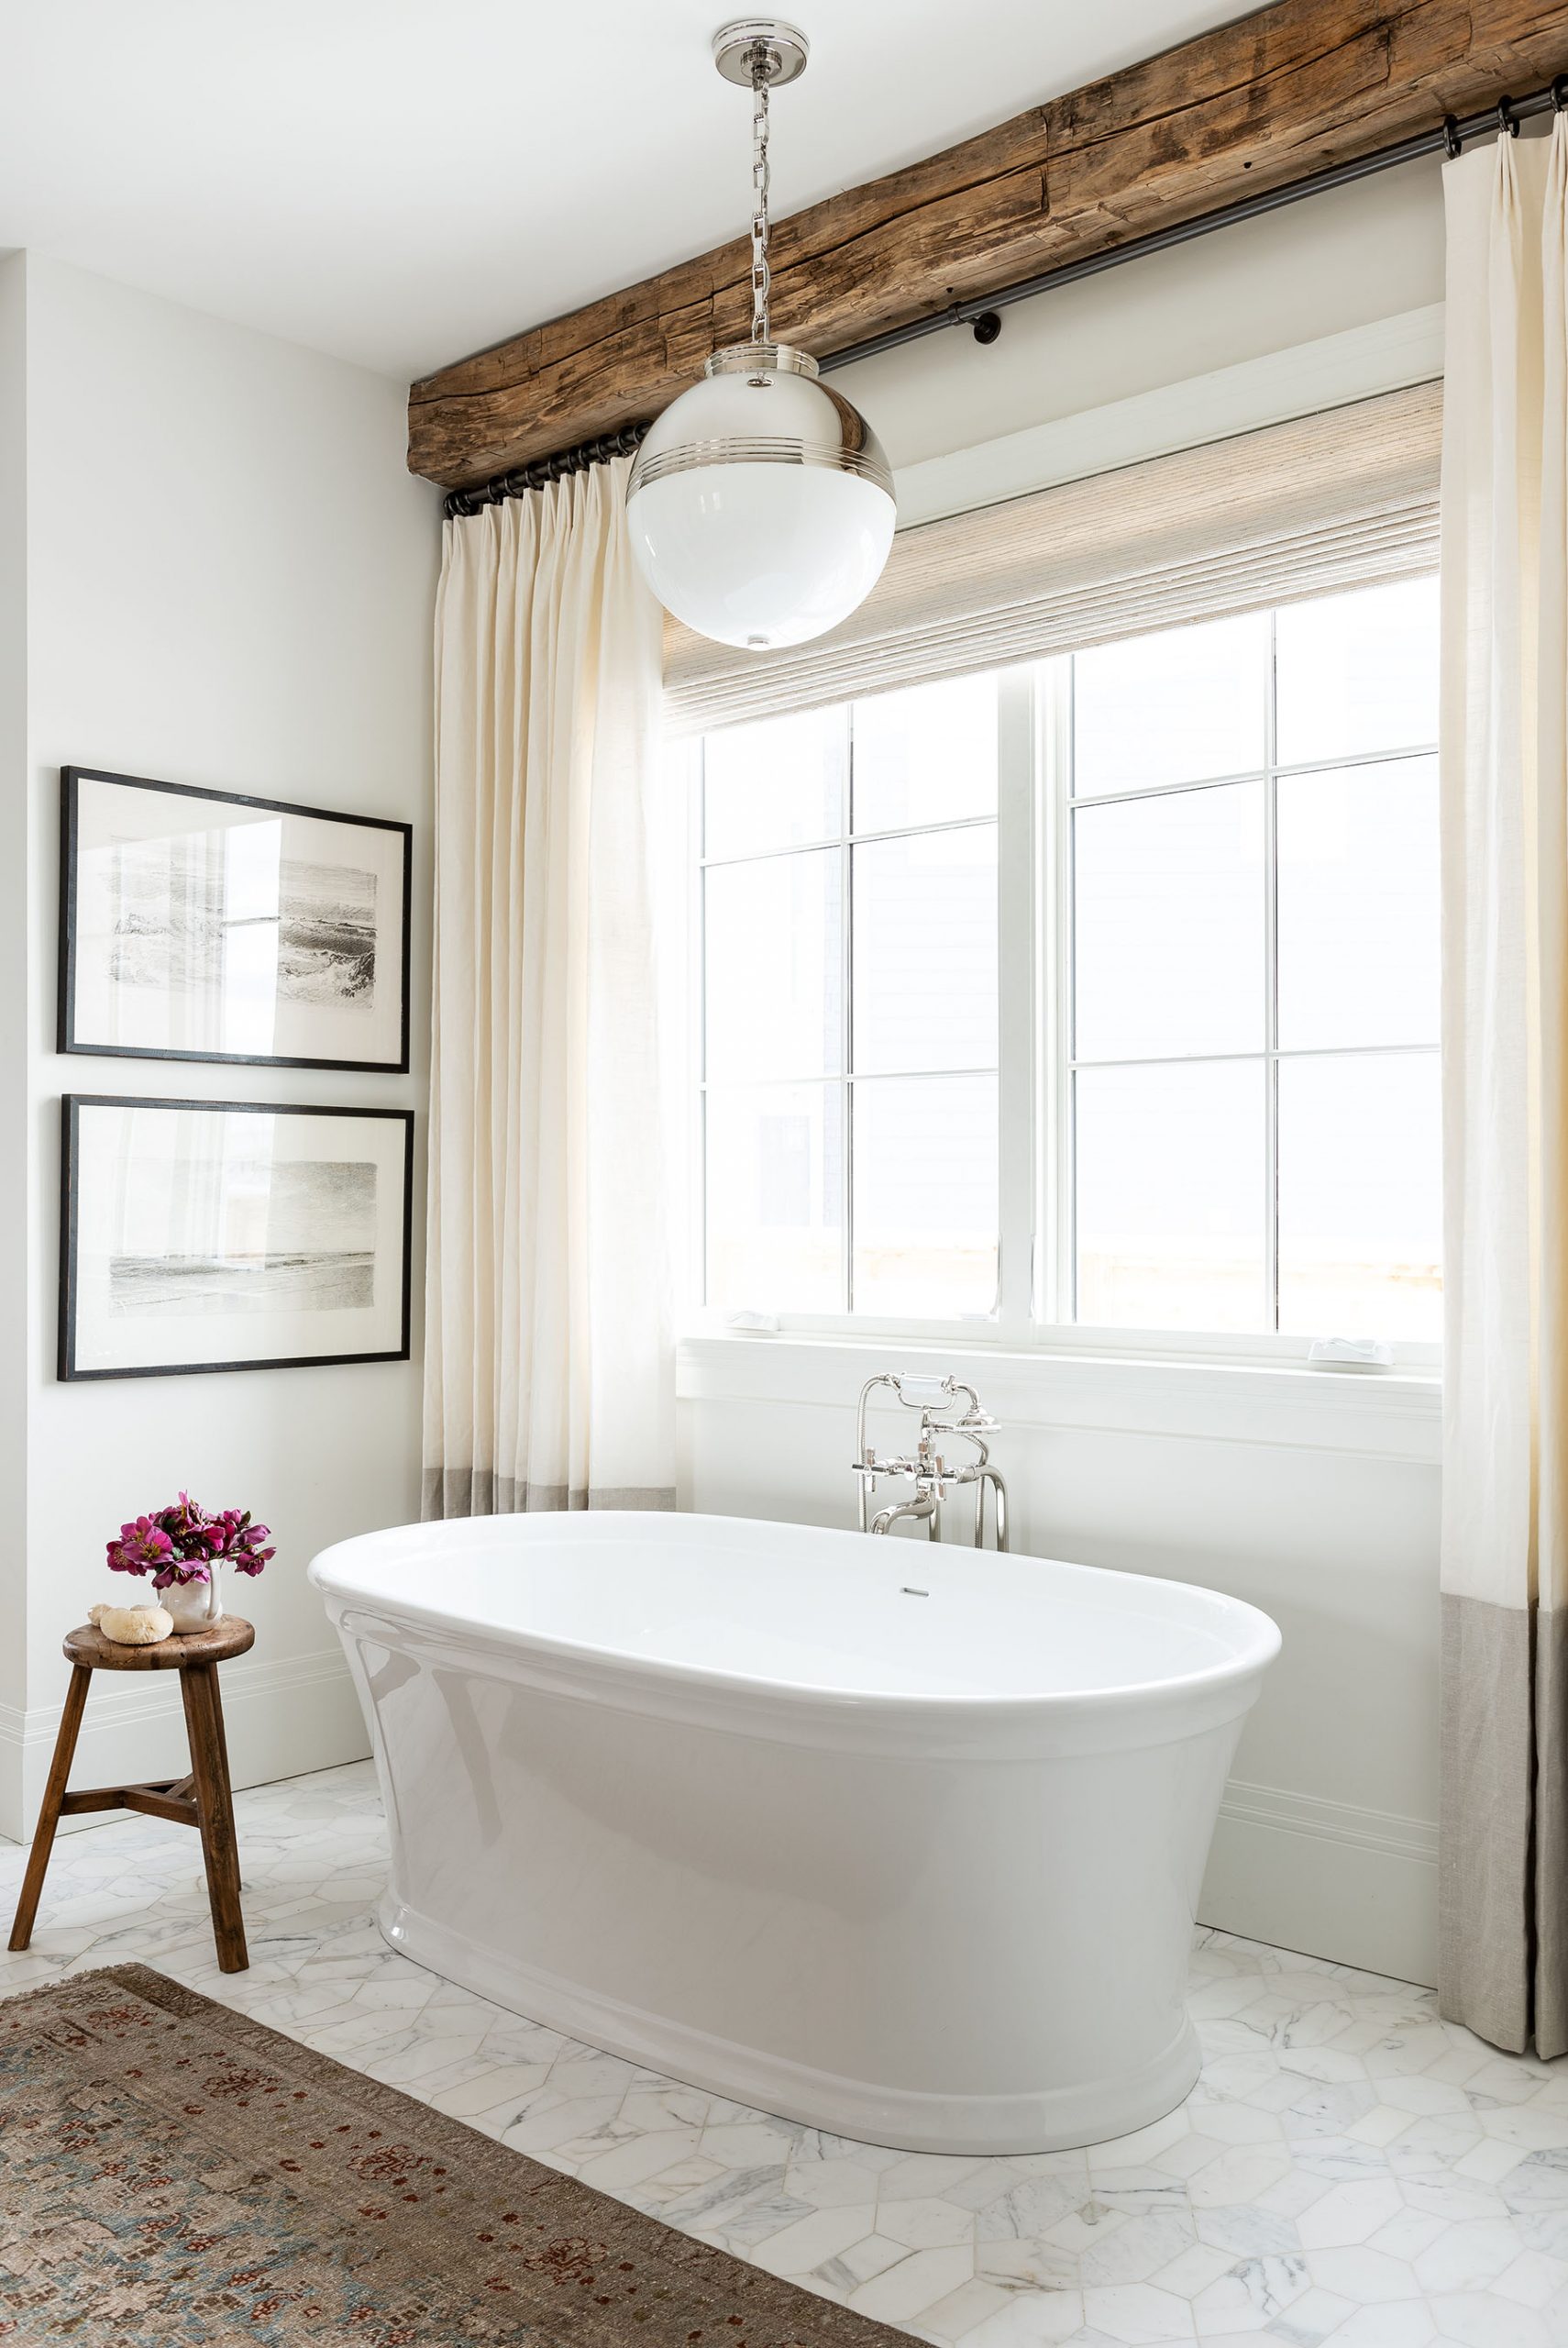 standing white bathtub with pendant hanging above